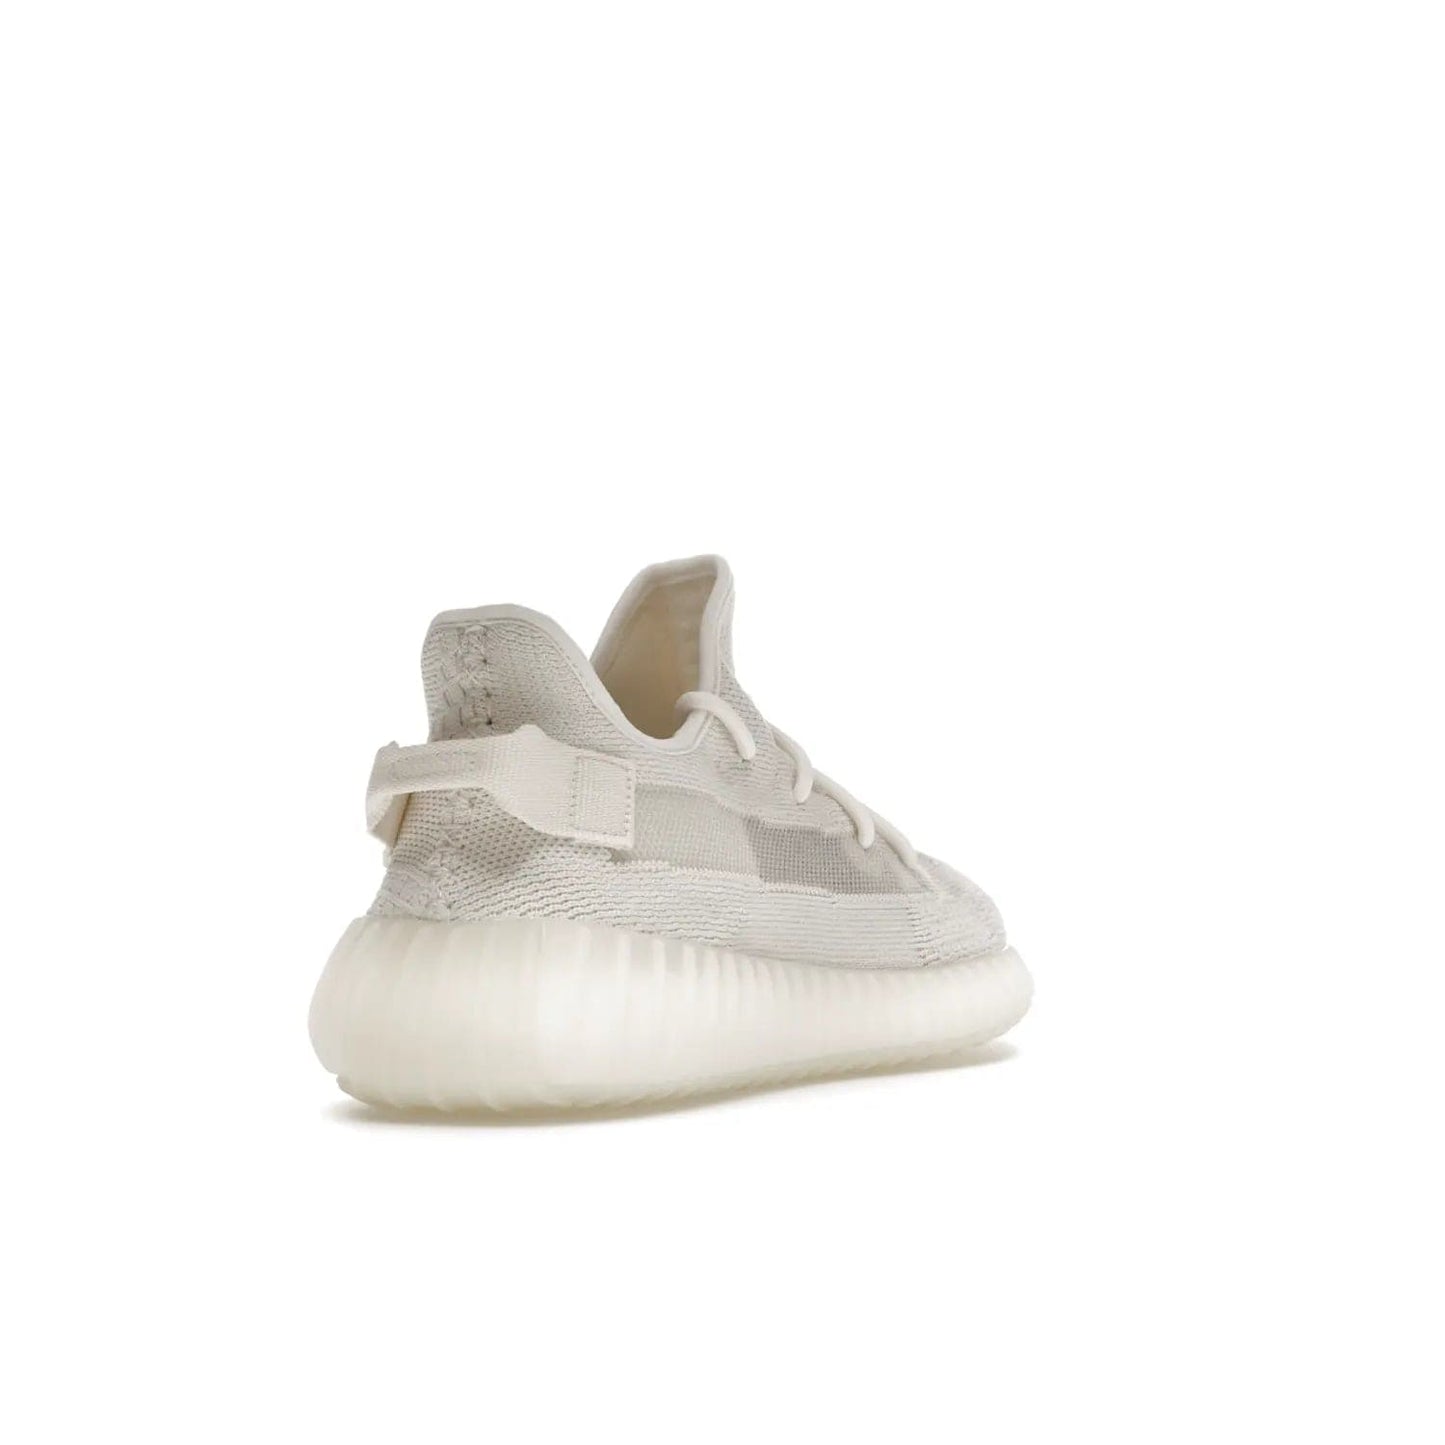 adidas Yeezy Boost 350 V2 Bone - Image 31 - Only at www.BallersClubKickz.com - Grab the stylish and comfortable adidas Yeezy Boost 350 V2 Bone in March 2022. This sneaker features a triple white Primeknit upper, mesh side stripes and canvas heel tabs, sitting atop a semi-translucent sole with Boost technology. Sure to keep your feet comfortable and stylish!